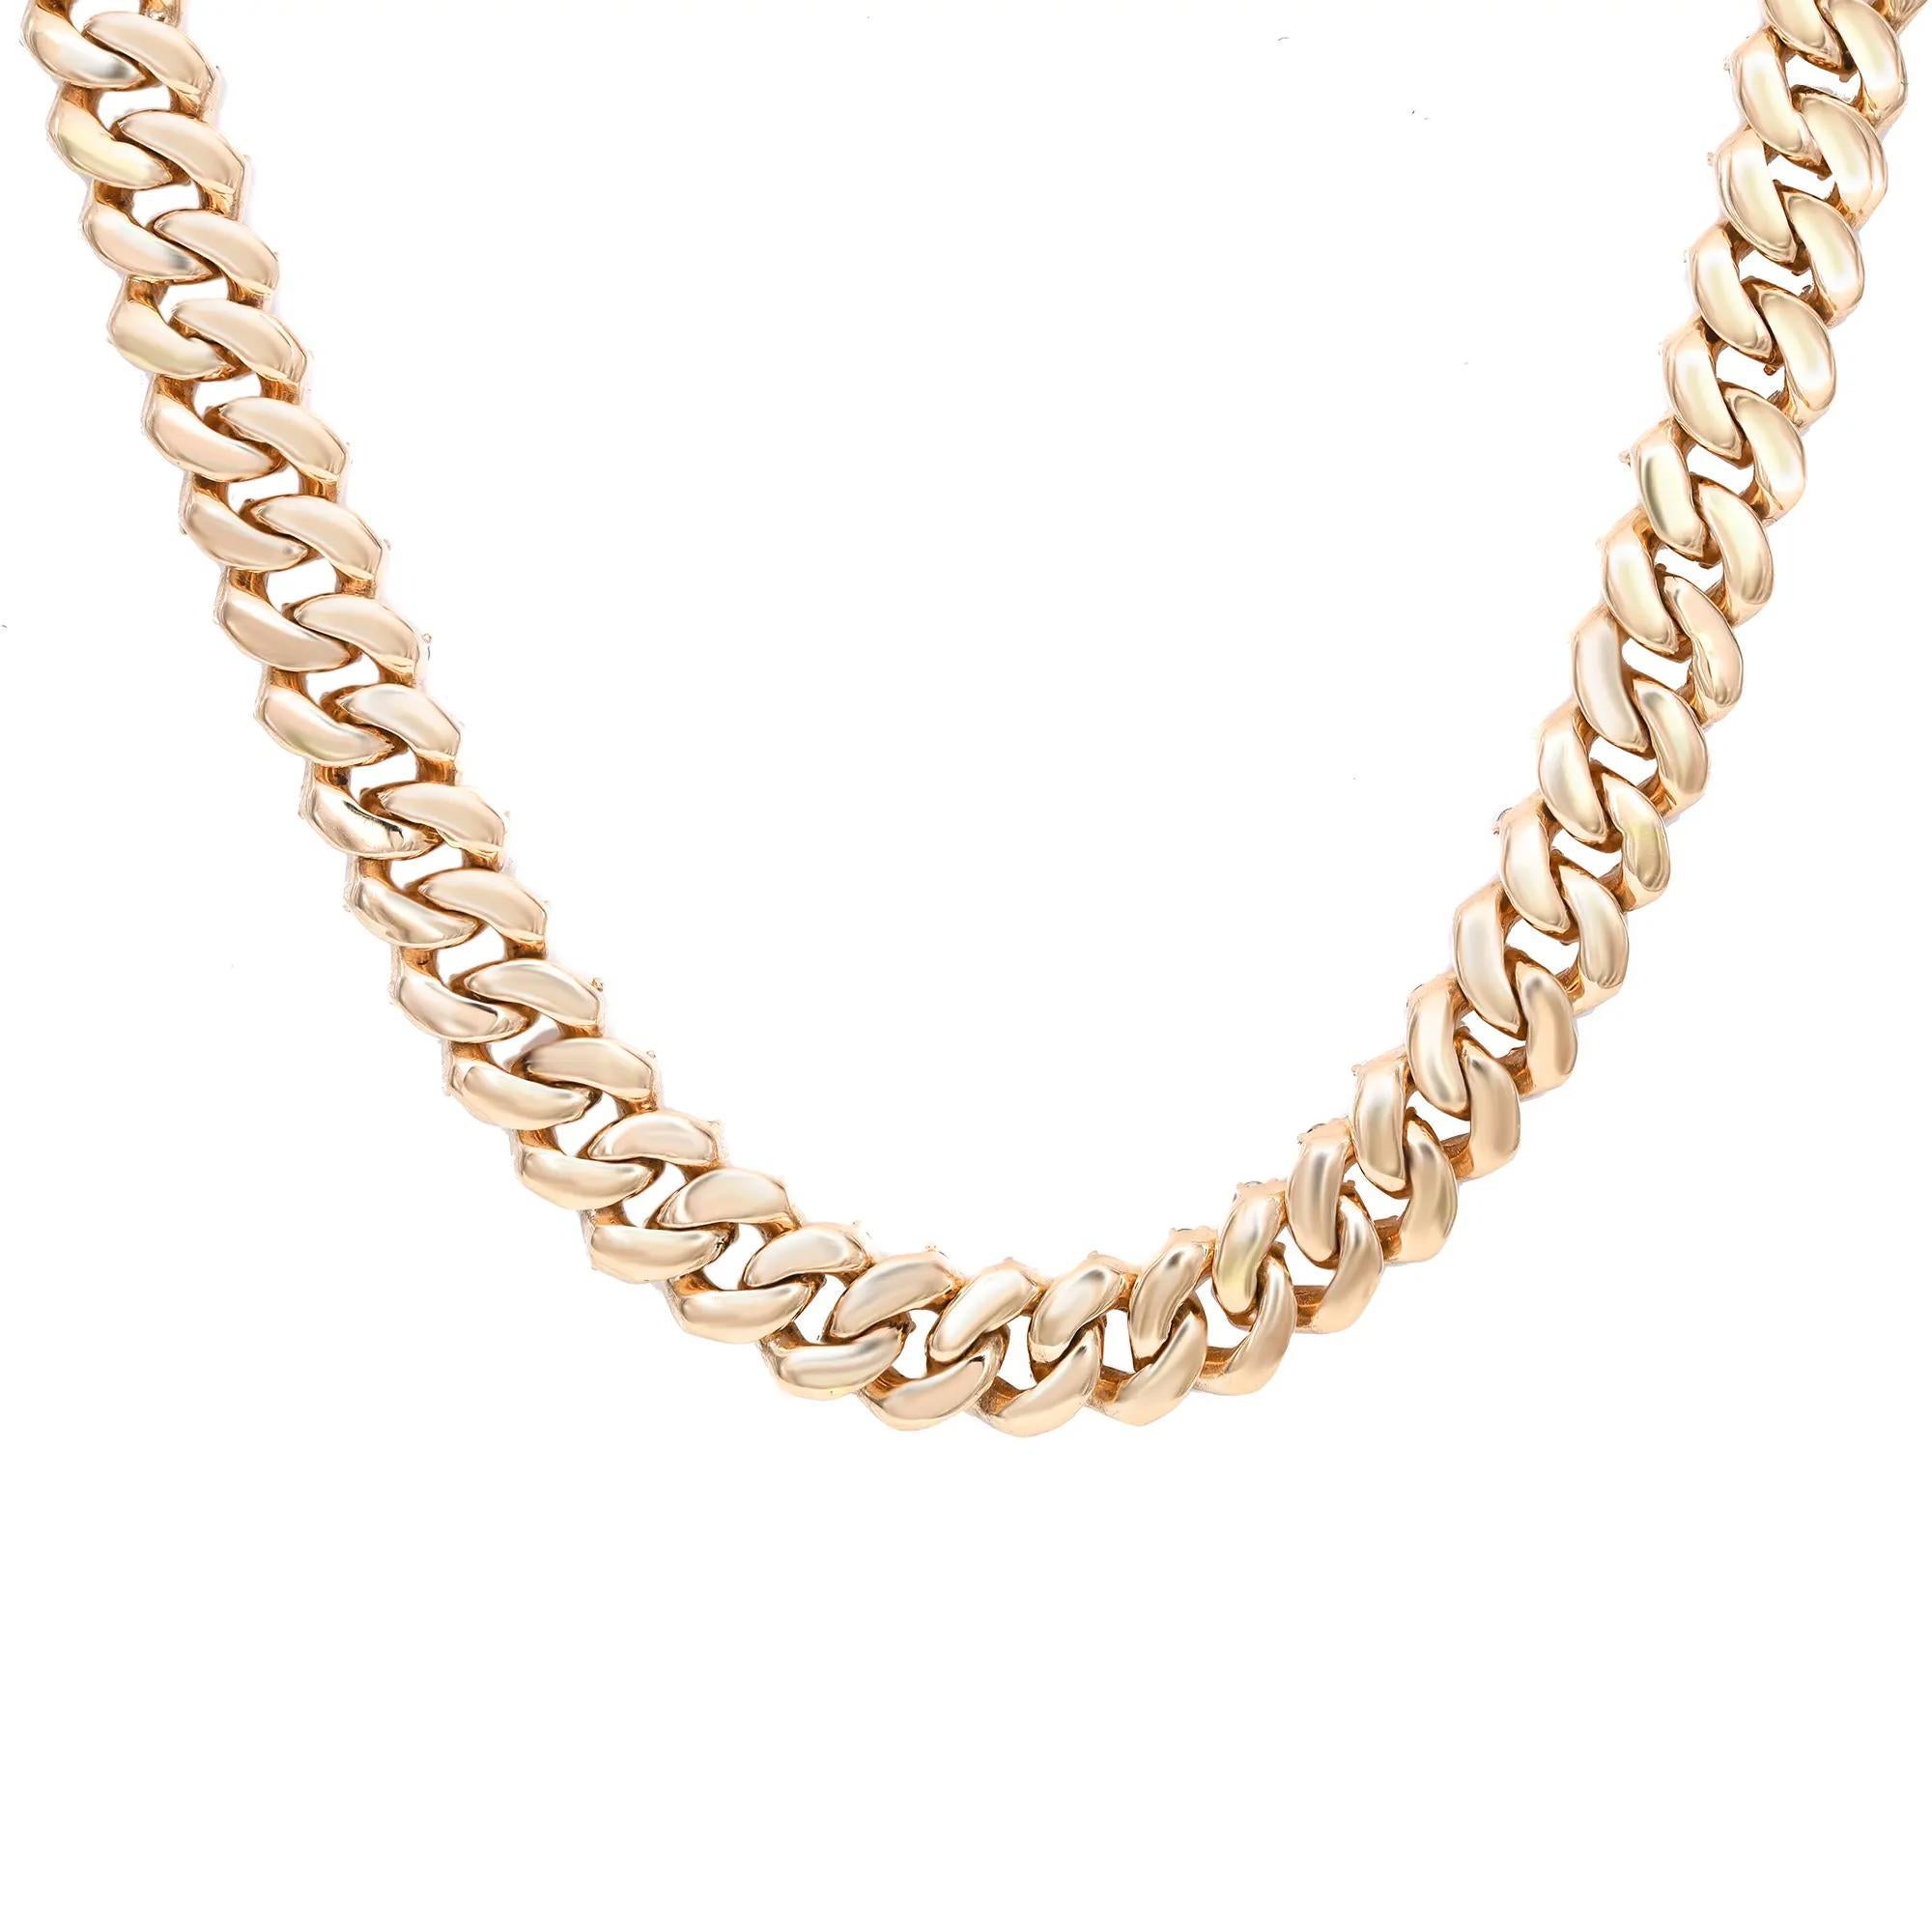 Modern 8.43cttw Round Cut Diamond Cuban Link Statement Necklace 14k Yellow Gold For Sale